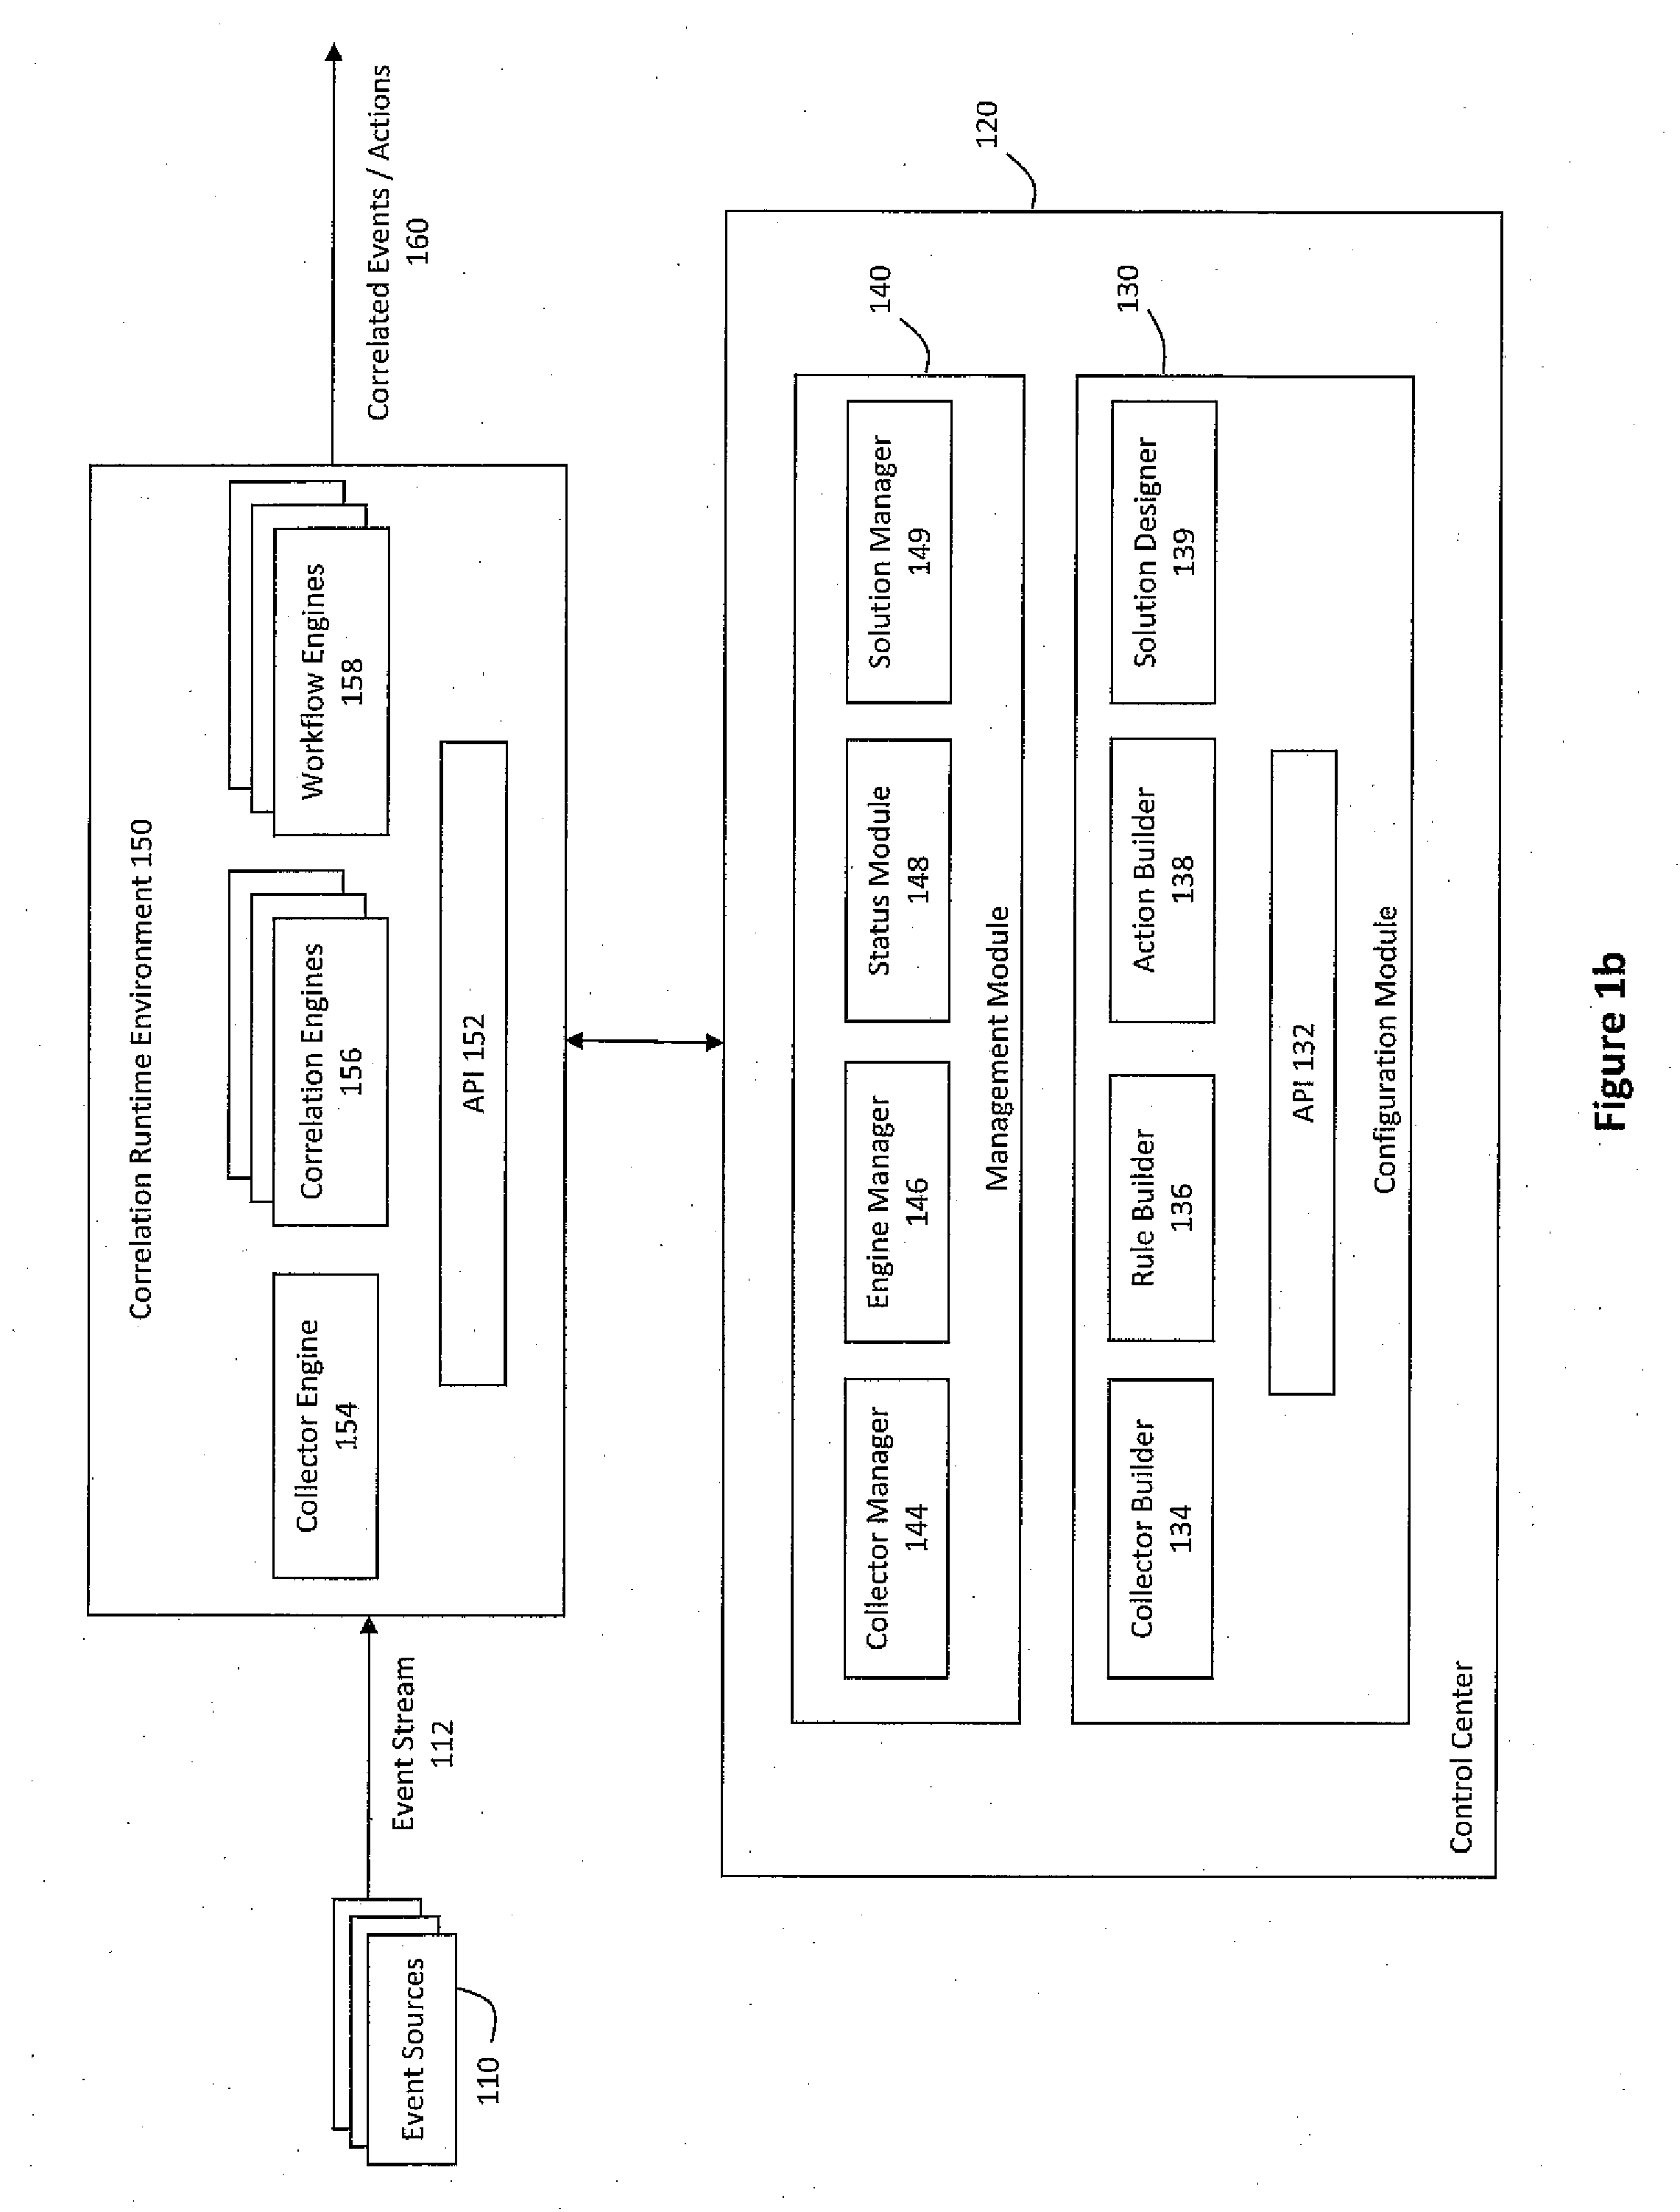 System and method for auditing governance, risk, and compliance using a pluggable correlation architecture